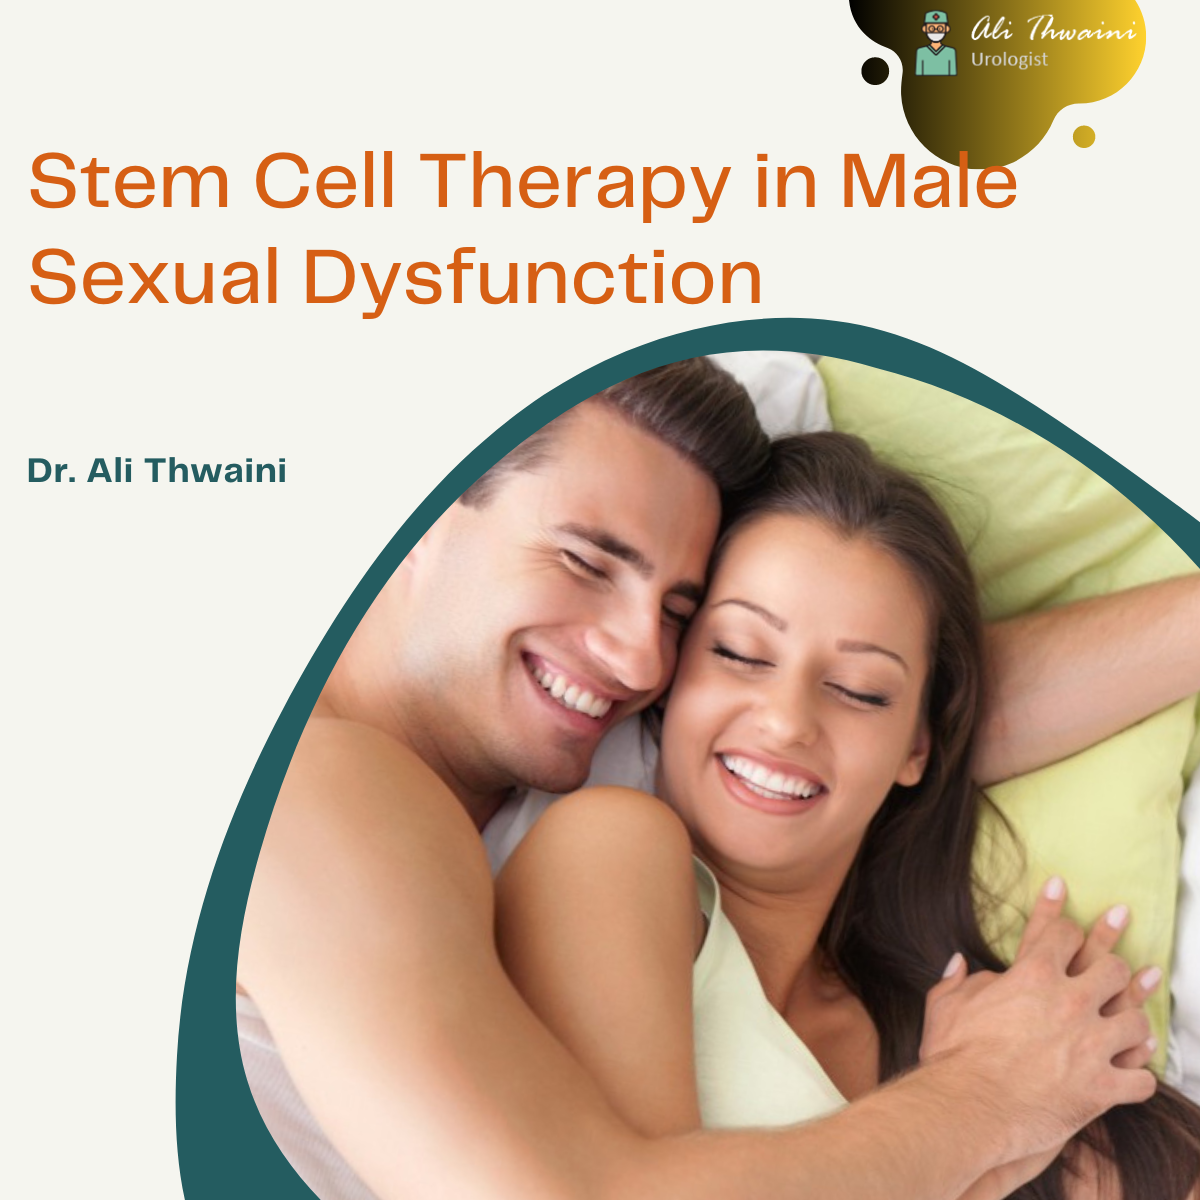 Stem Cell Therapy in Male Sexual Dysfunction: